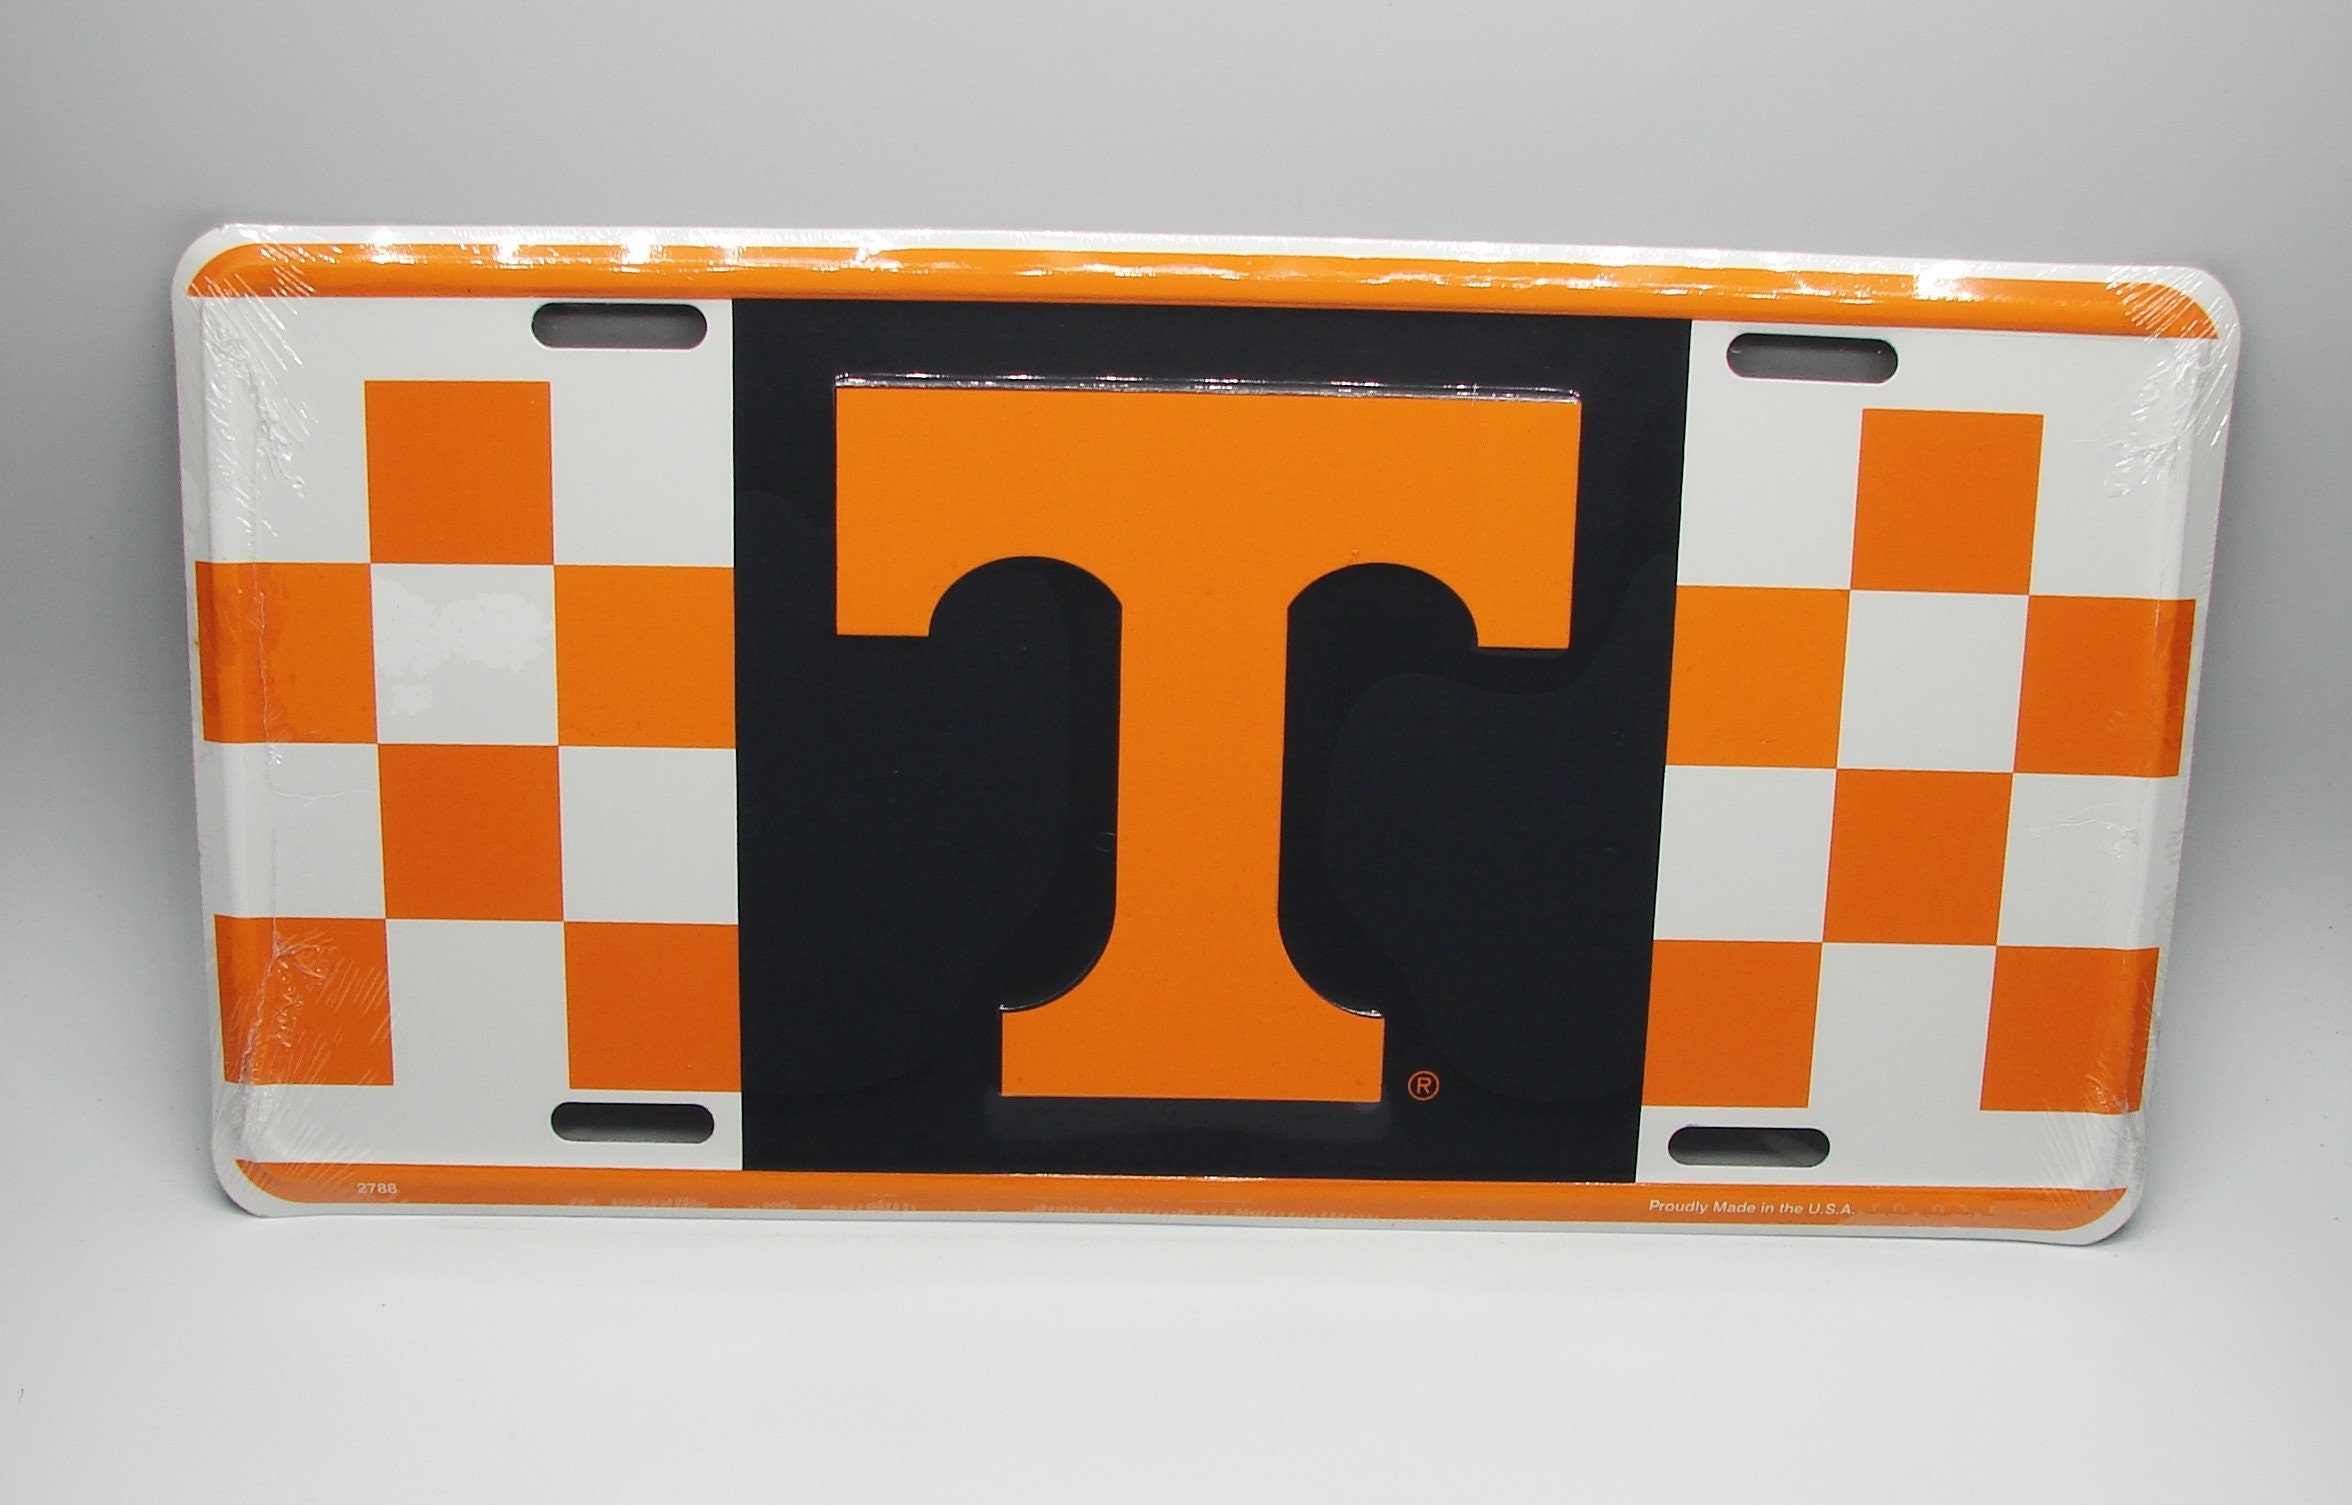 Placa Personalizada de TENNESSEE / Any text-Cualquier texto / Car Plate  TENNESSEE / License Plate Tennessee / Tennessee State -  México